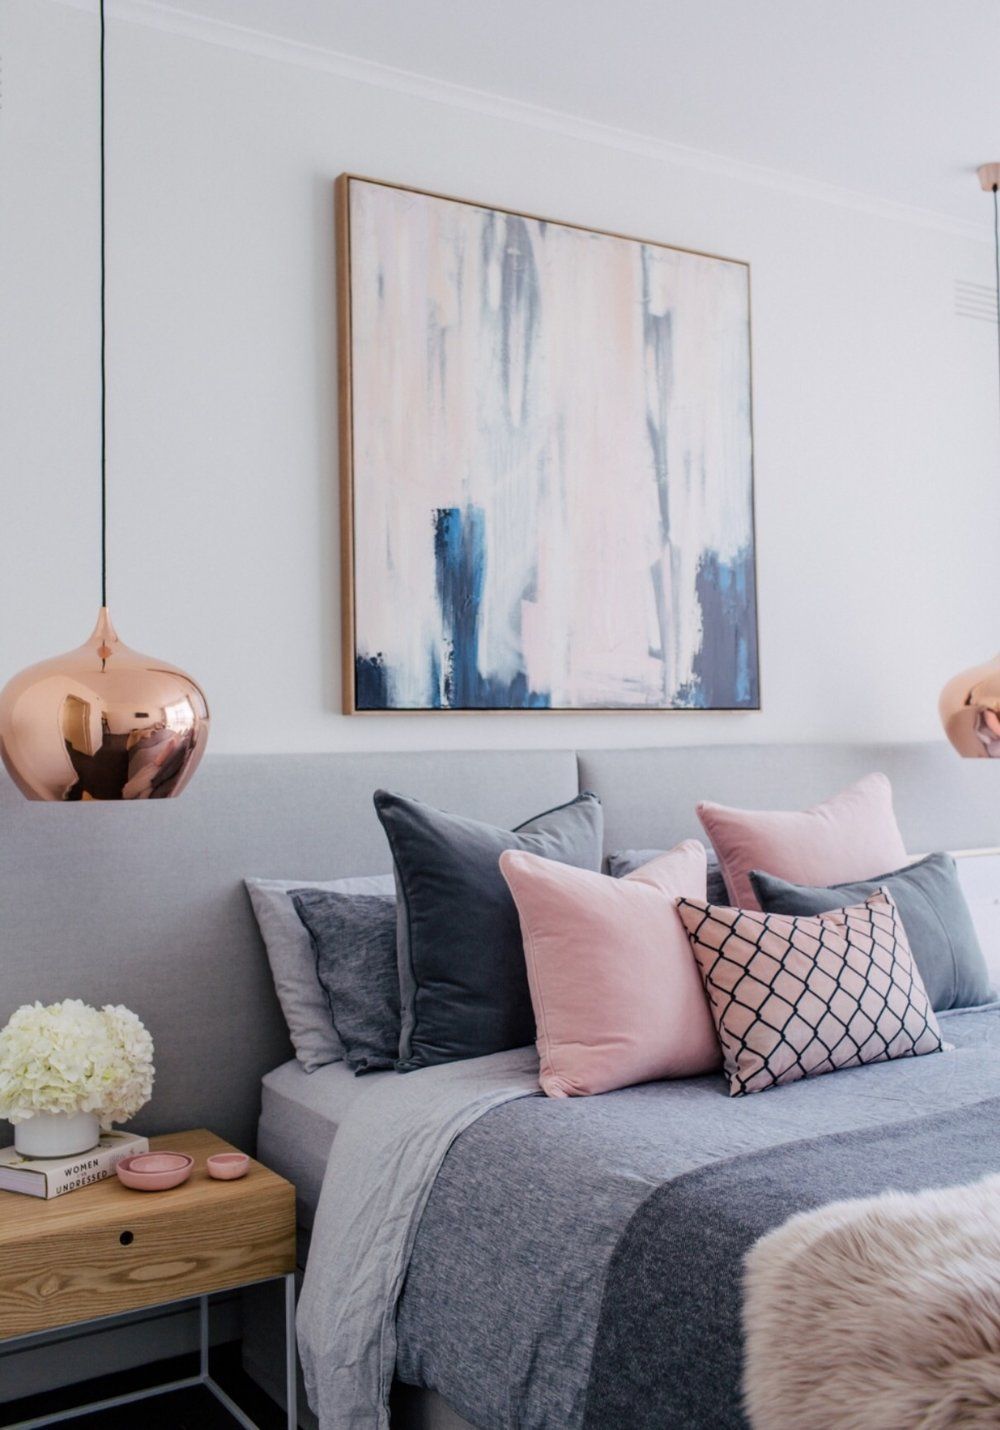 Bedroom inspiration for a great and pink Blush scheme with copper, textures and coloured cushion in grey, pink and pattern.